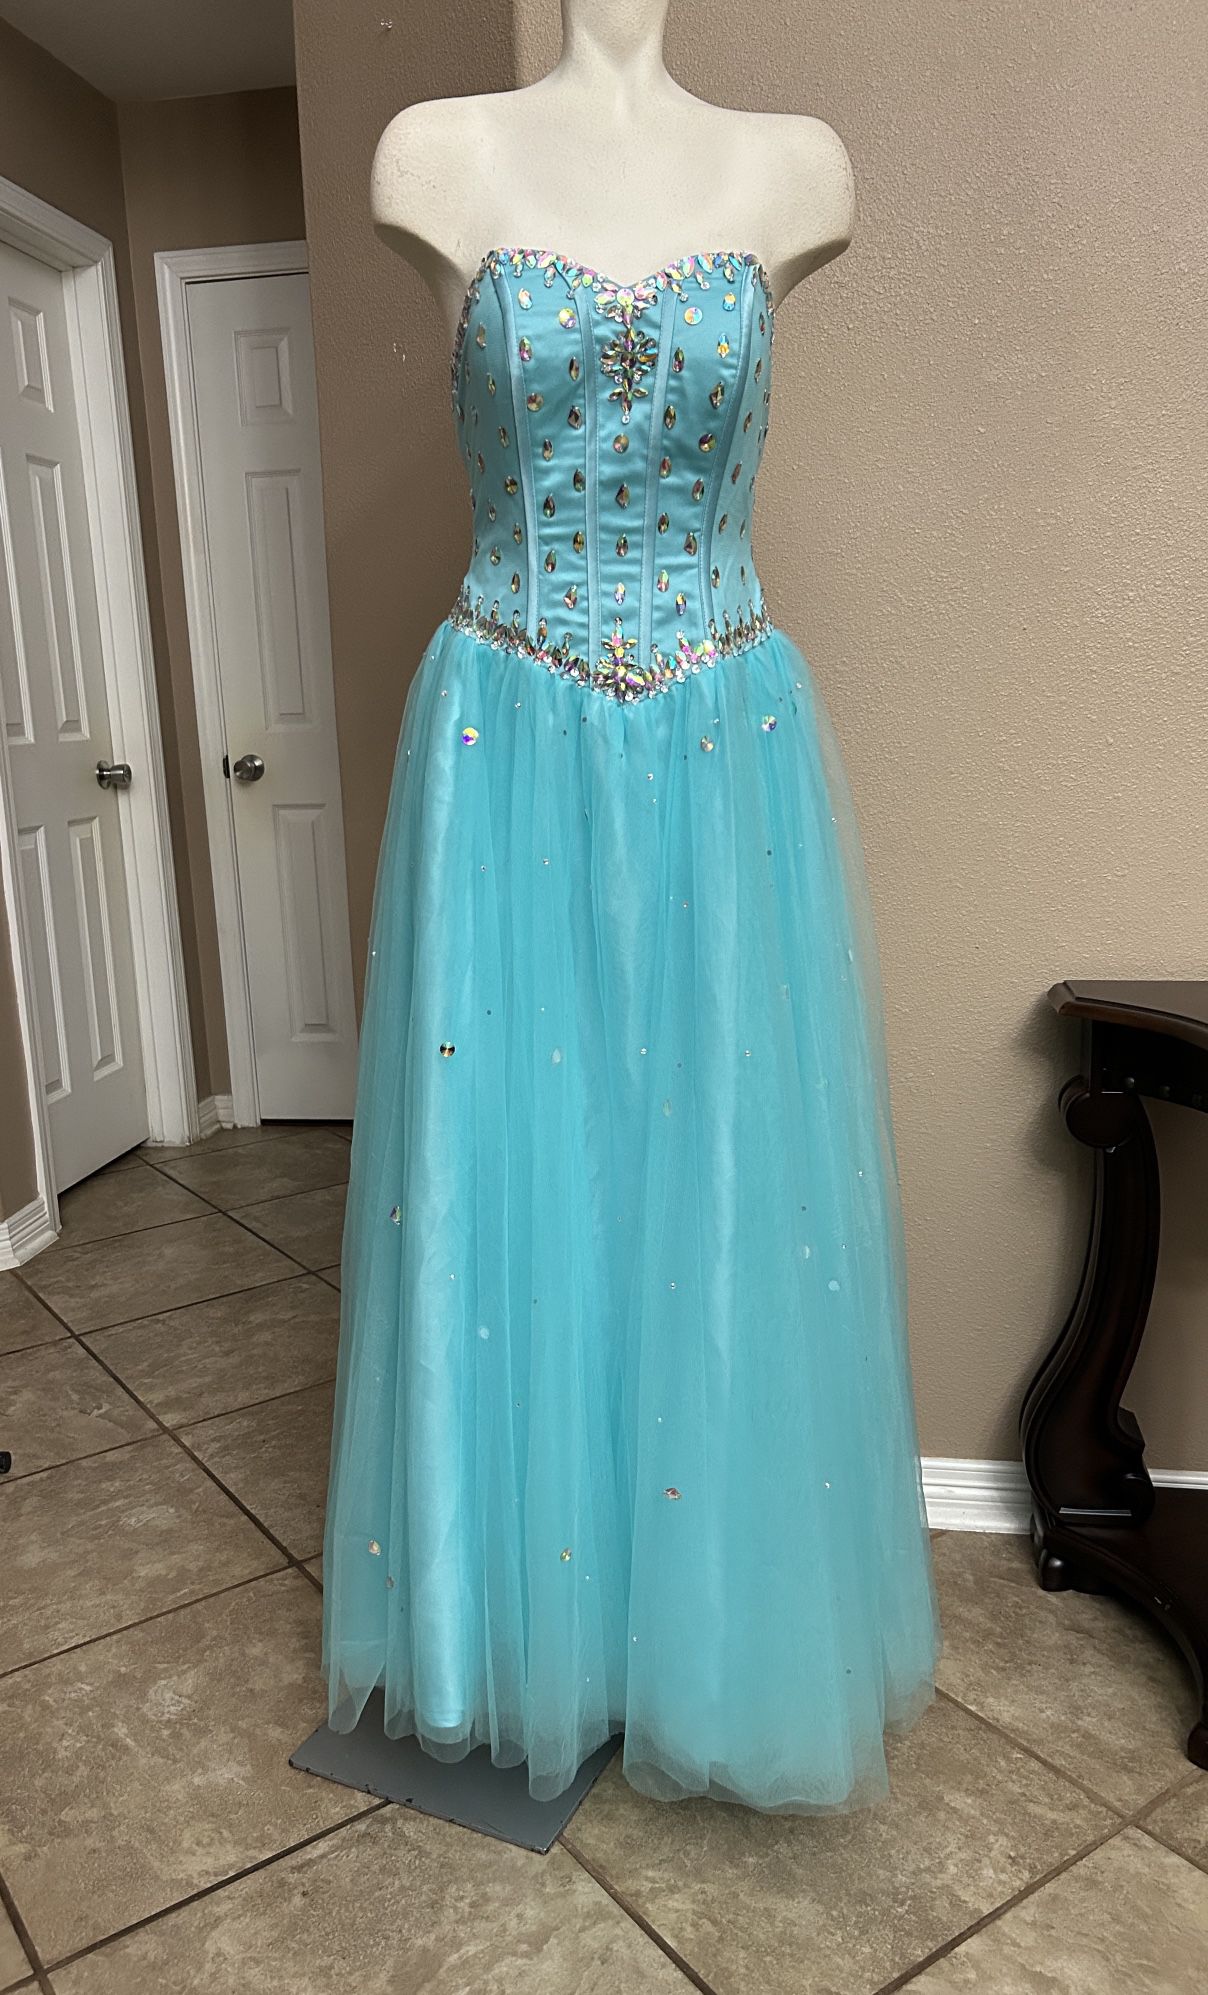 Prom Dress Size Medium Without Tag.